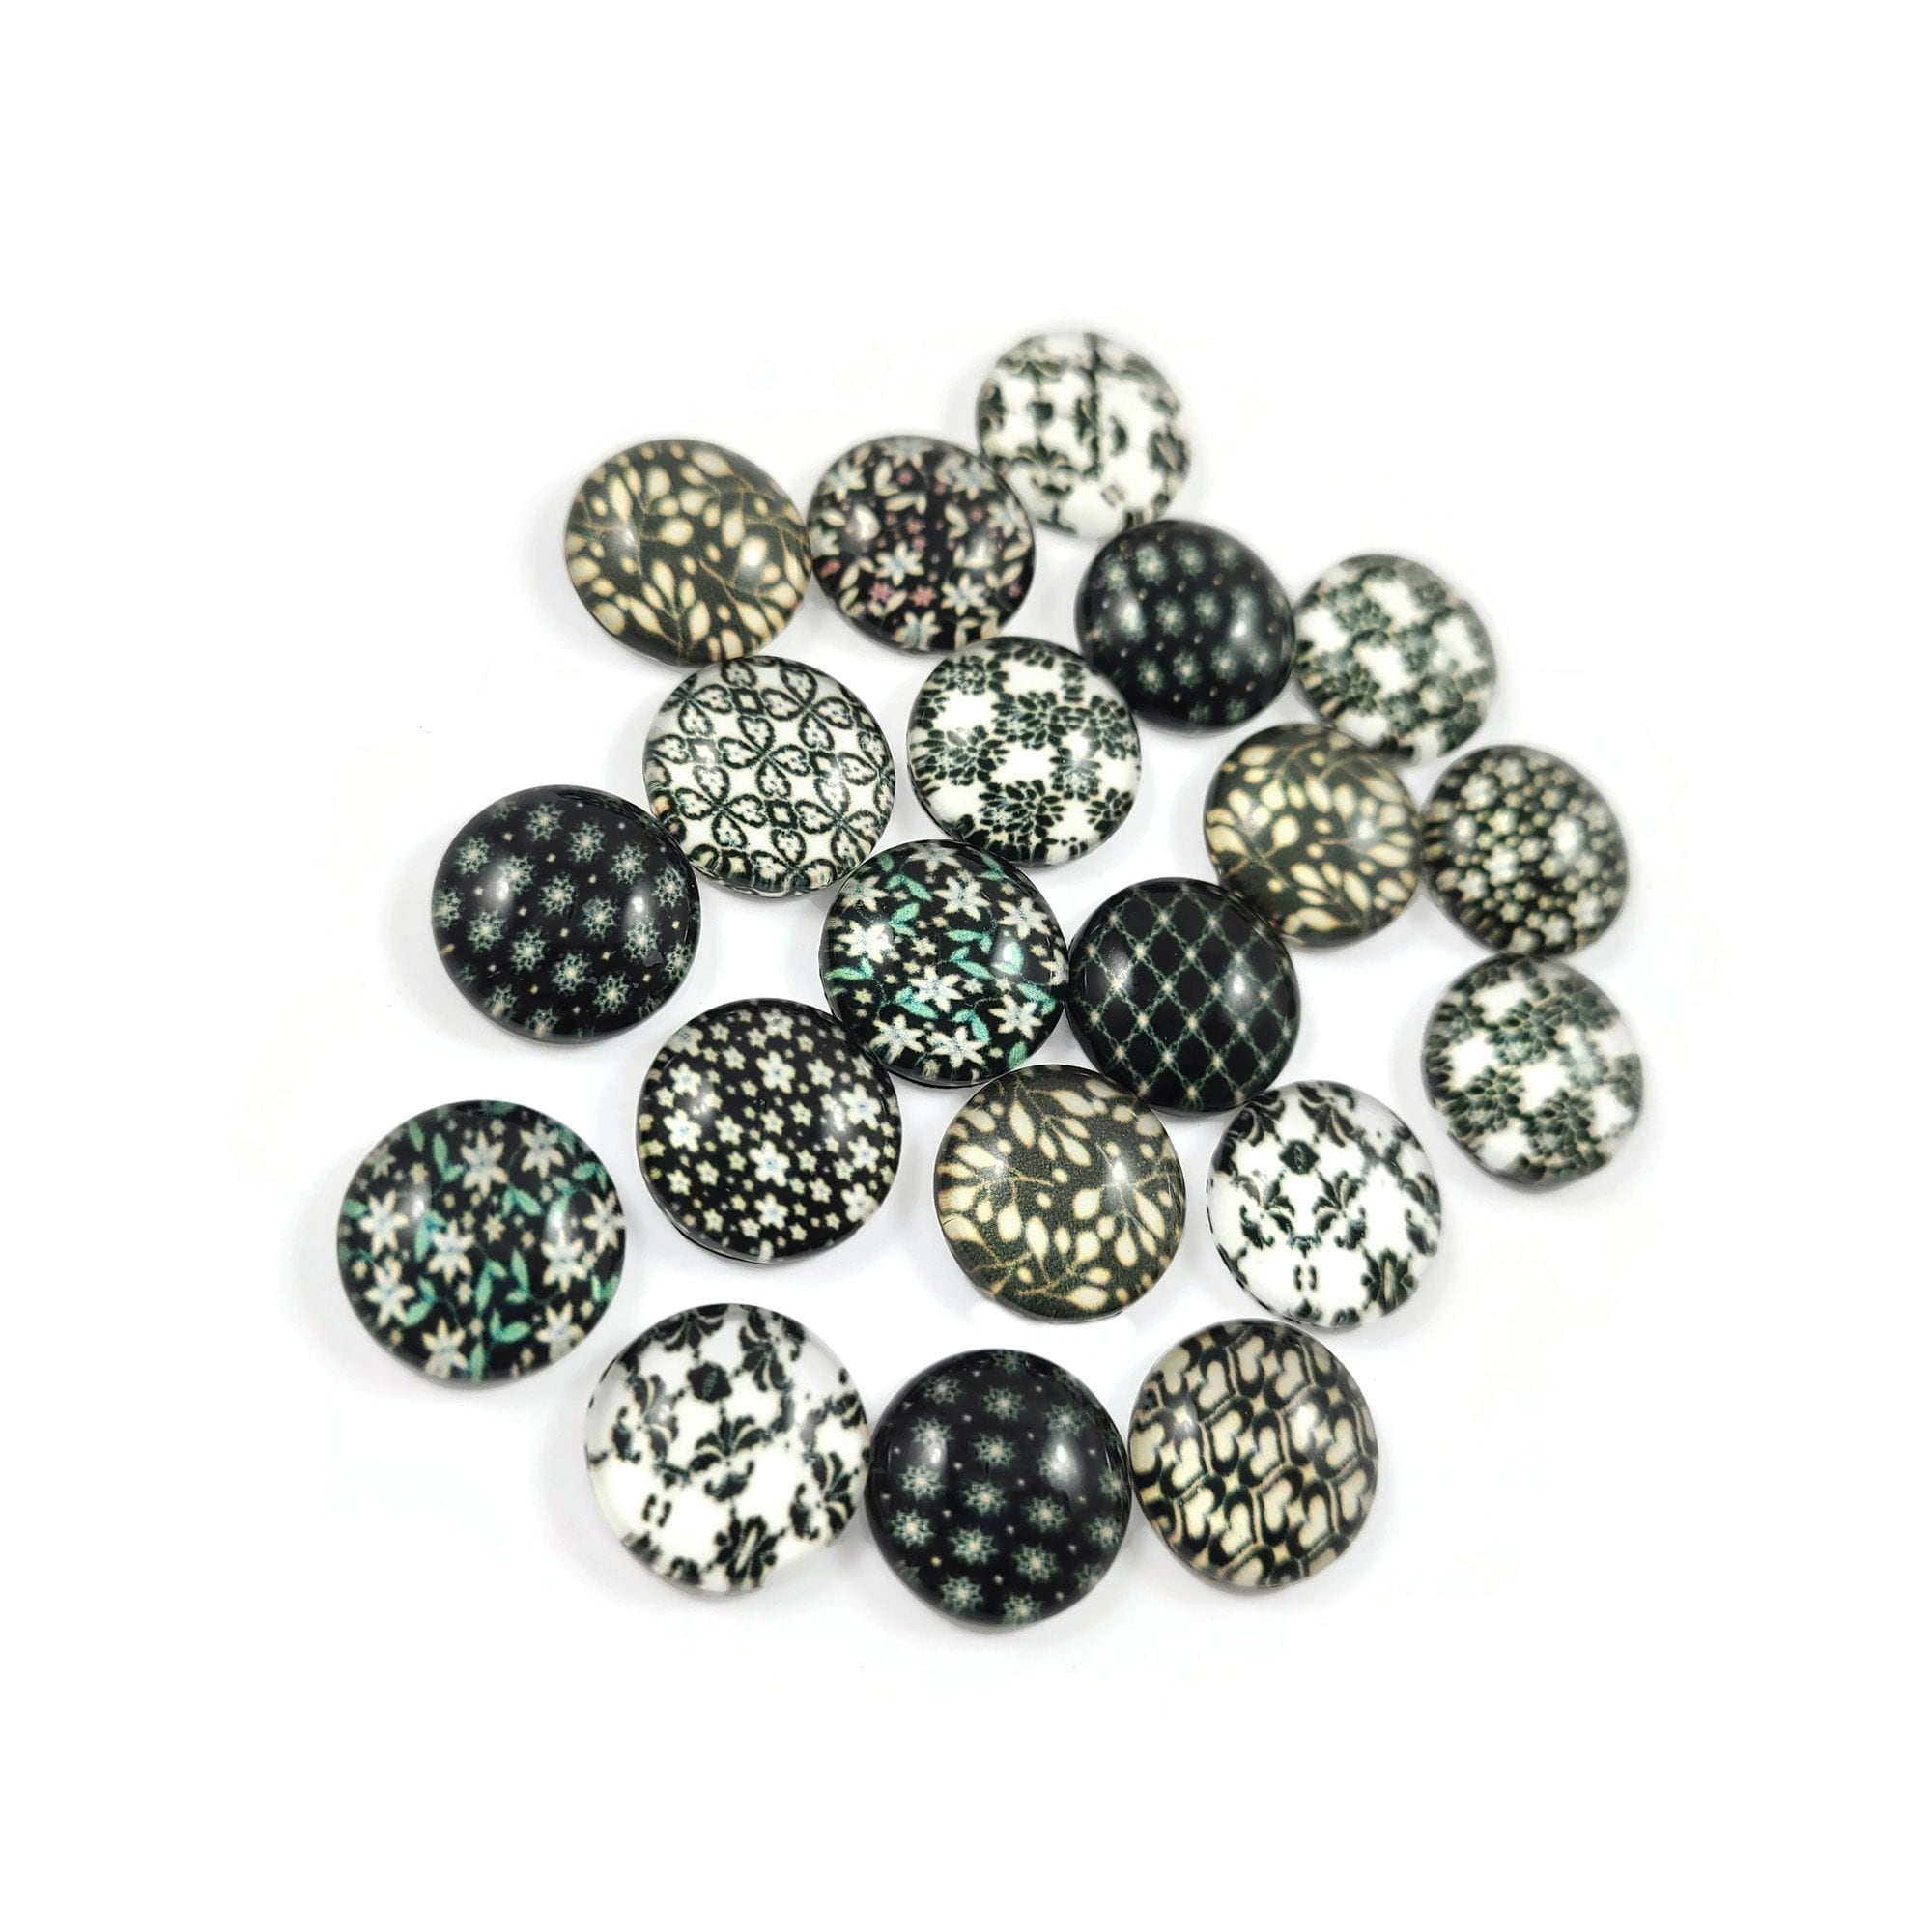 Mixed black floral glass cabochons - set of 20 round dome cabochons - 12mm